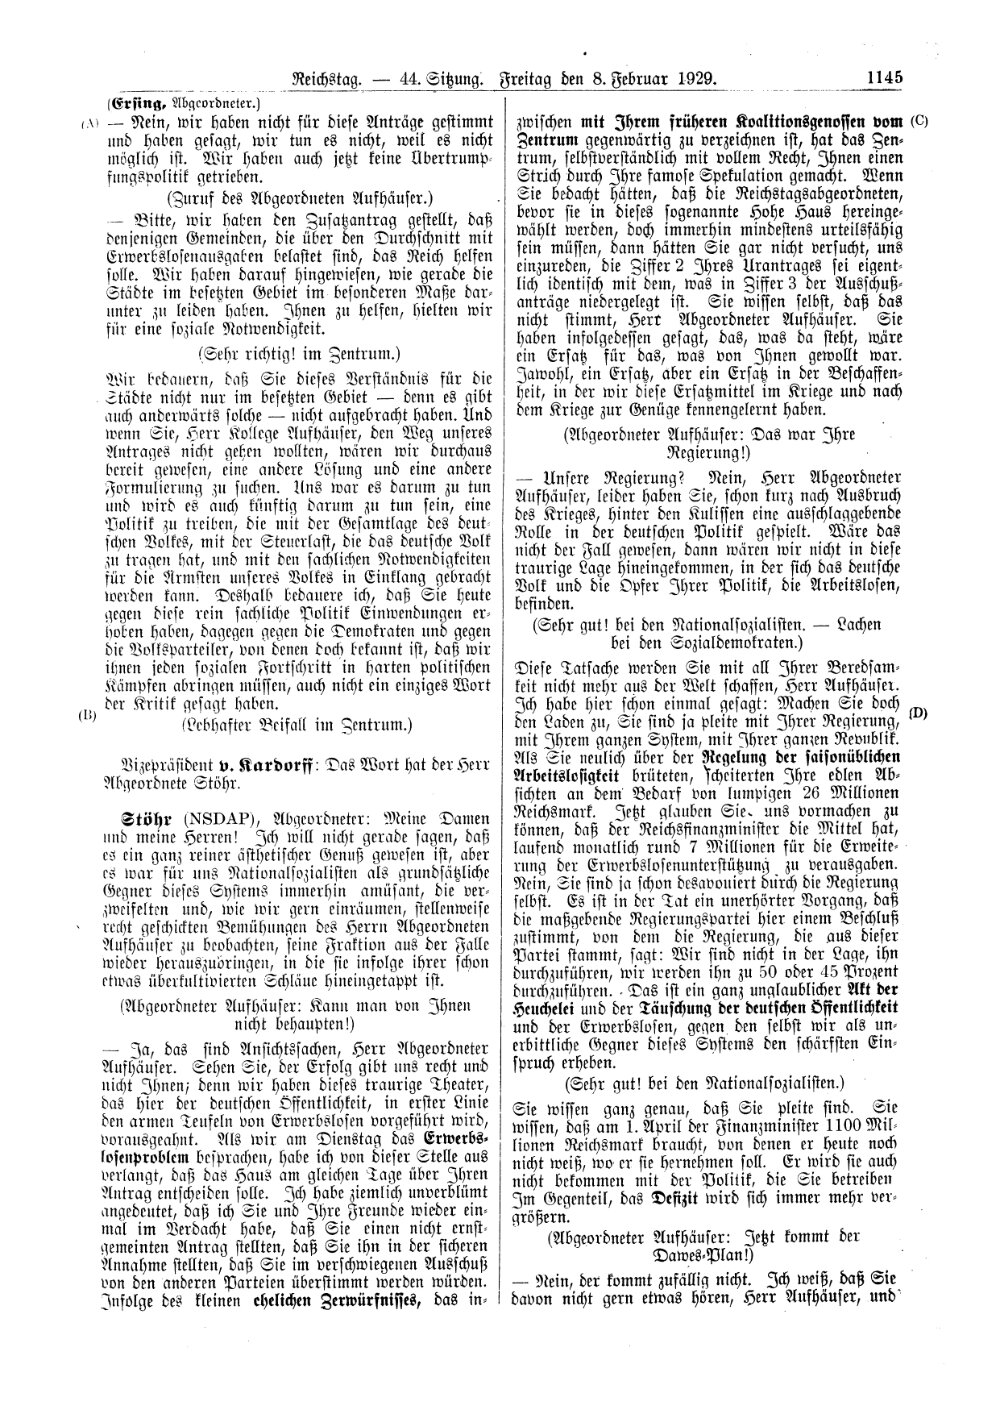 Scan of page 1145